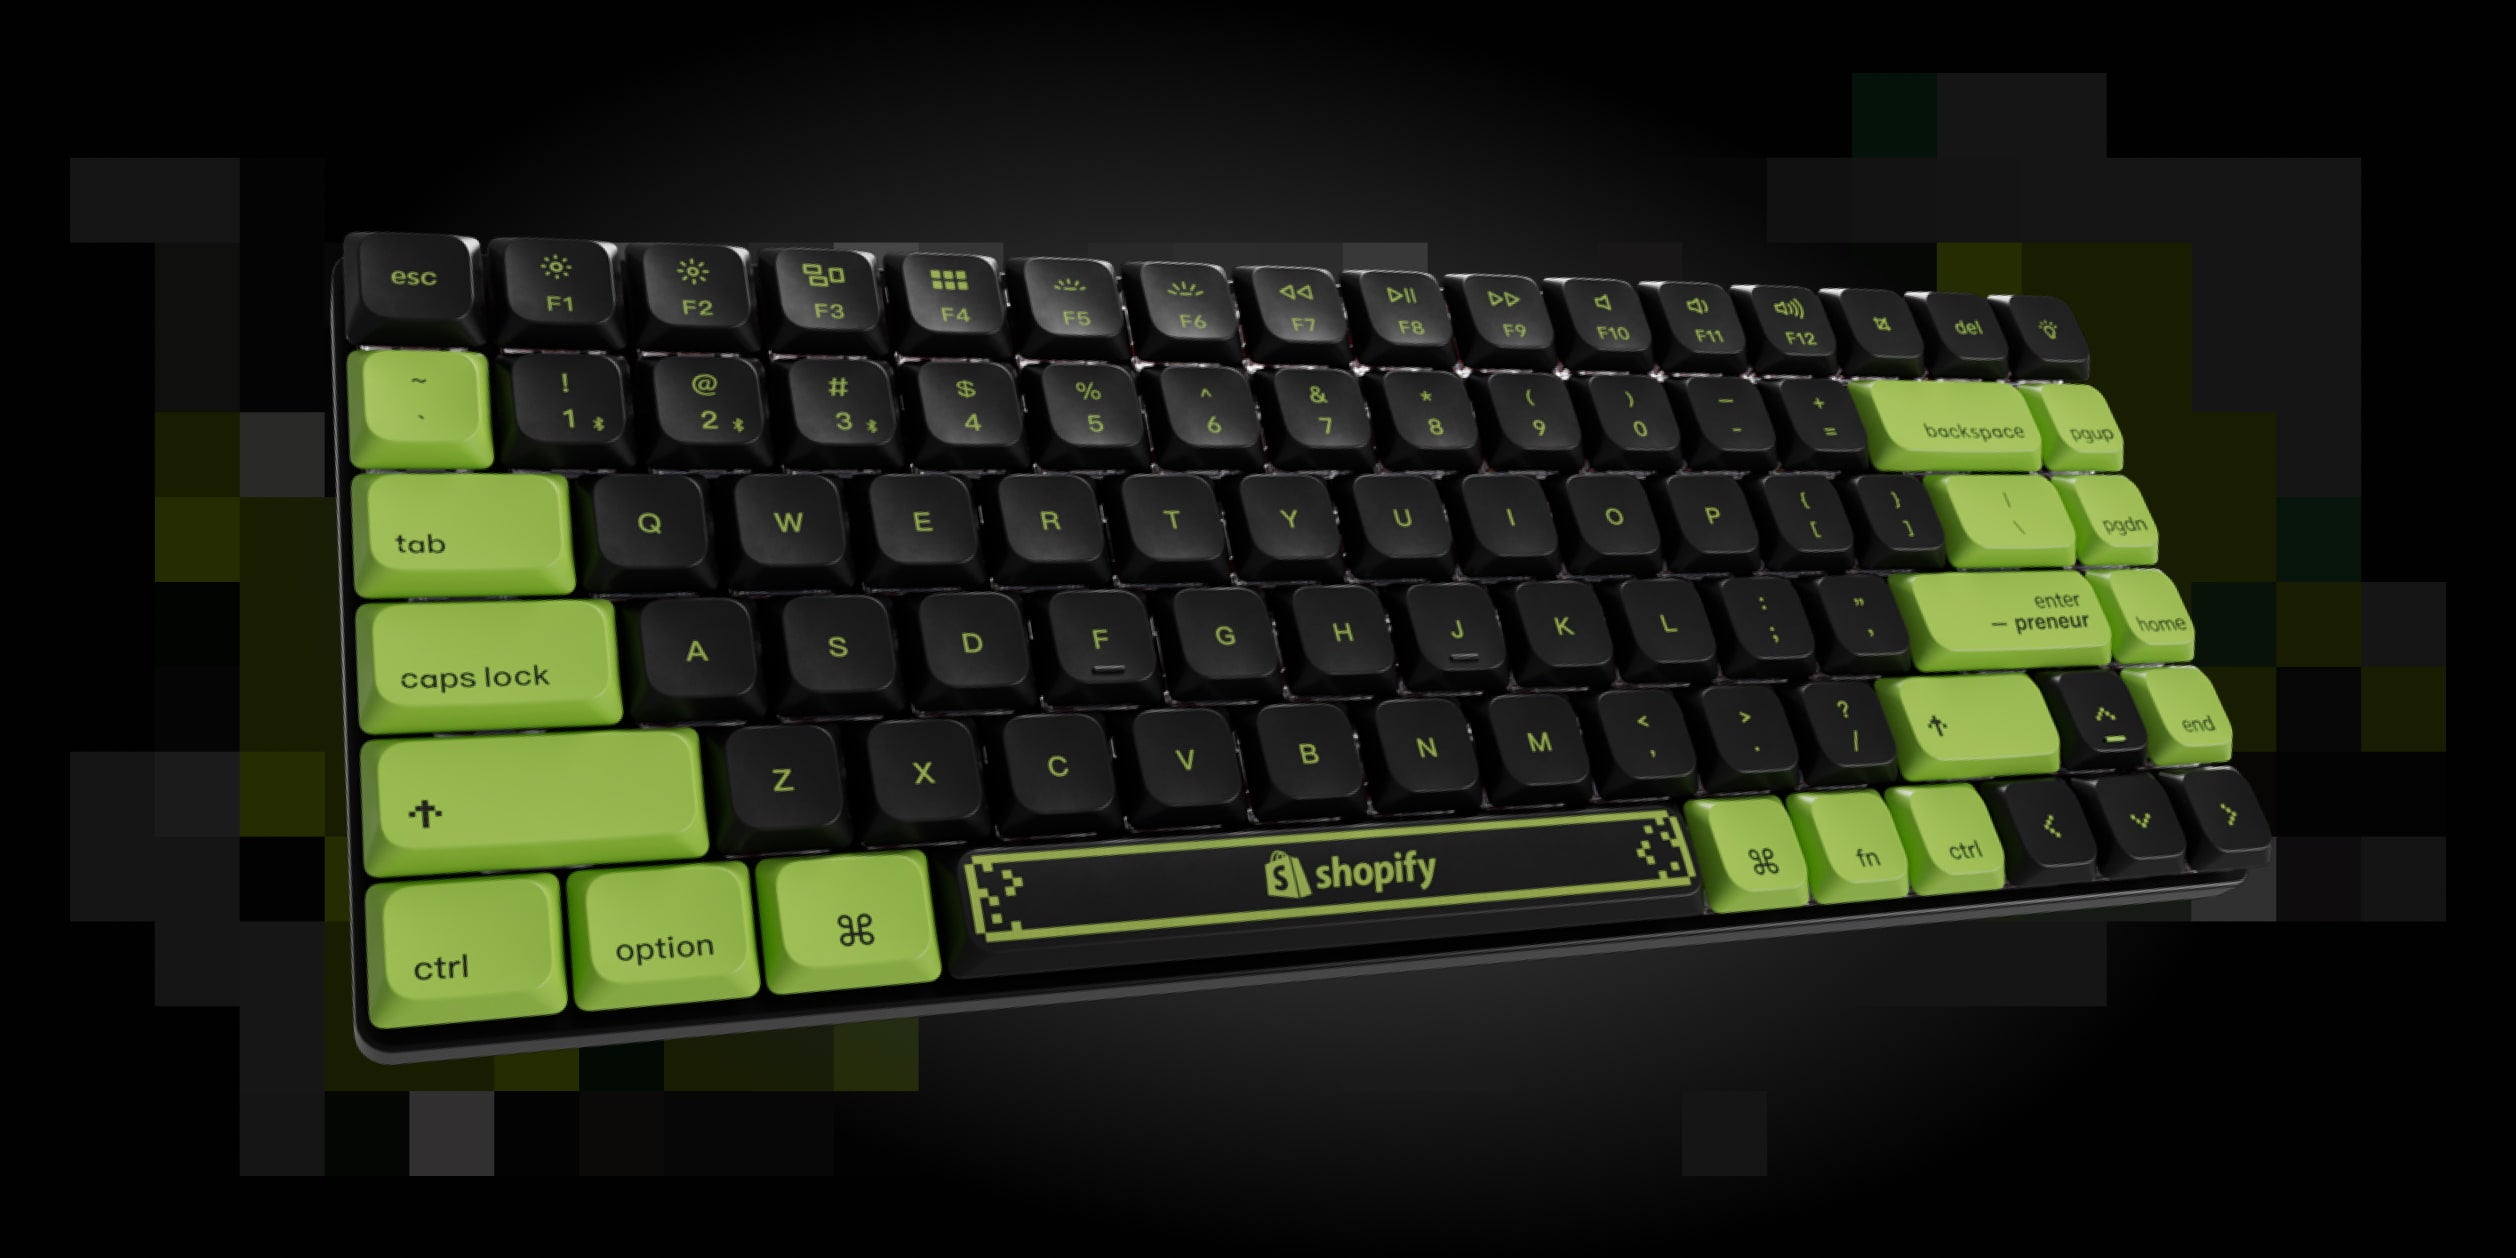 Shopify and Keychron collaboration keyboard